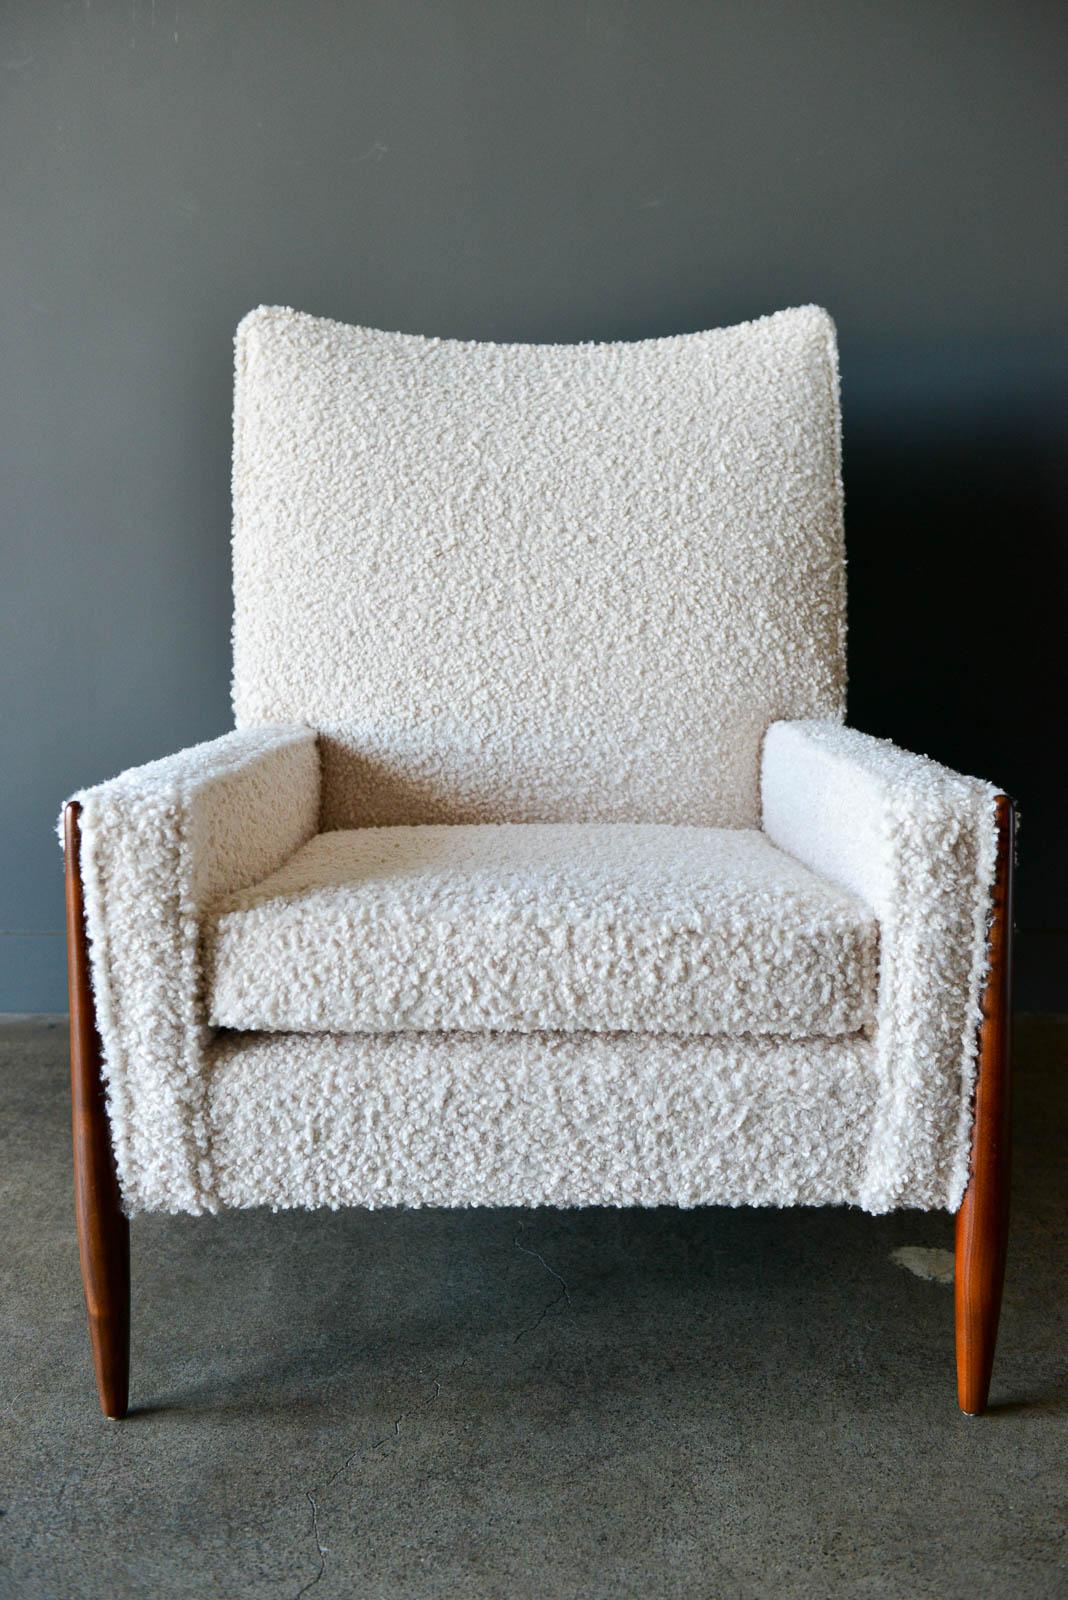 High back walnut frame lounge chair by Jules Heumann, circa 1960. Professionally restored walnut frame and sculpted legs with beautiful soft ivory/cream bouclé fabric. Showroom perfect condition, this is a very comfortable lounge chair that works